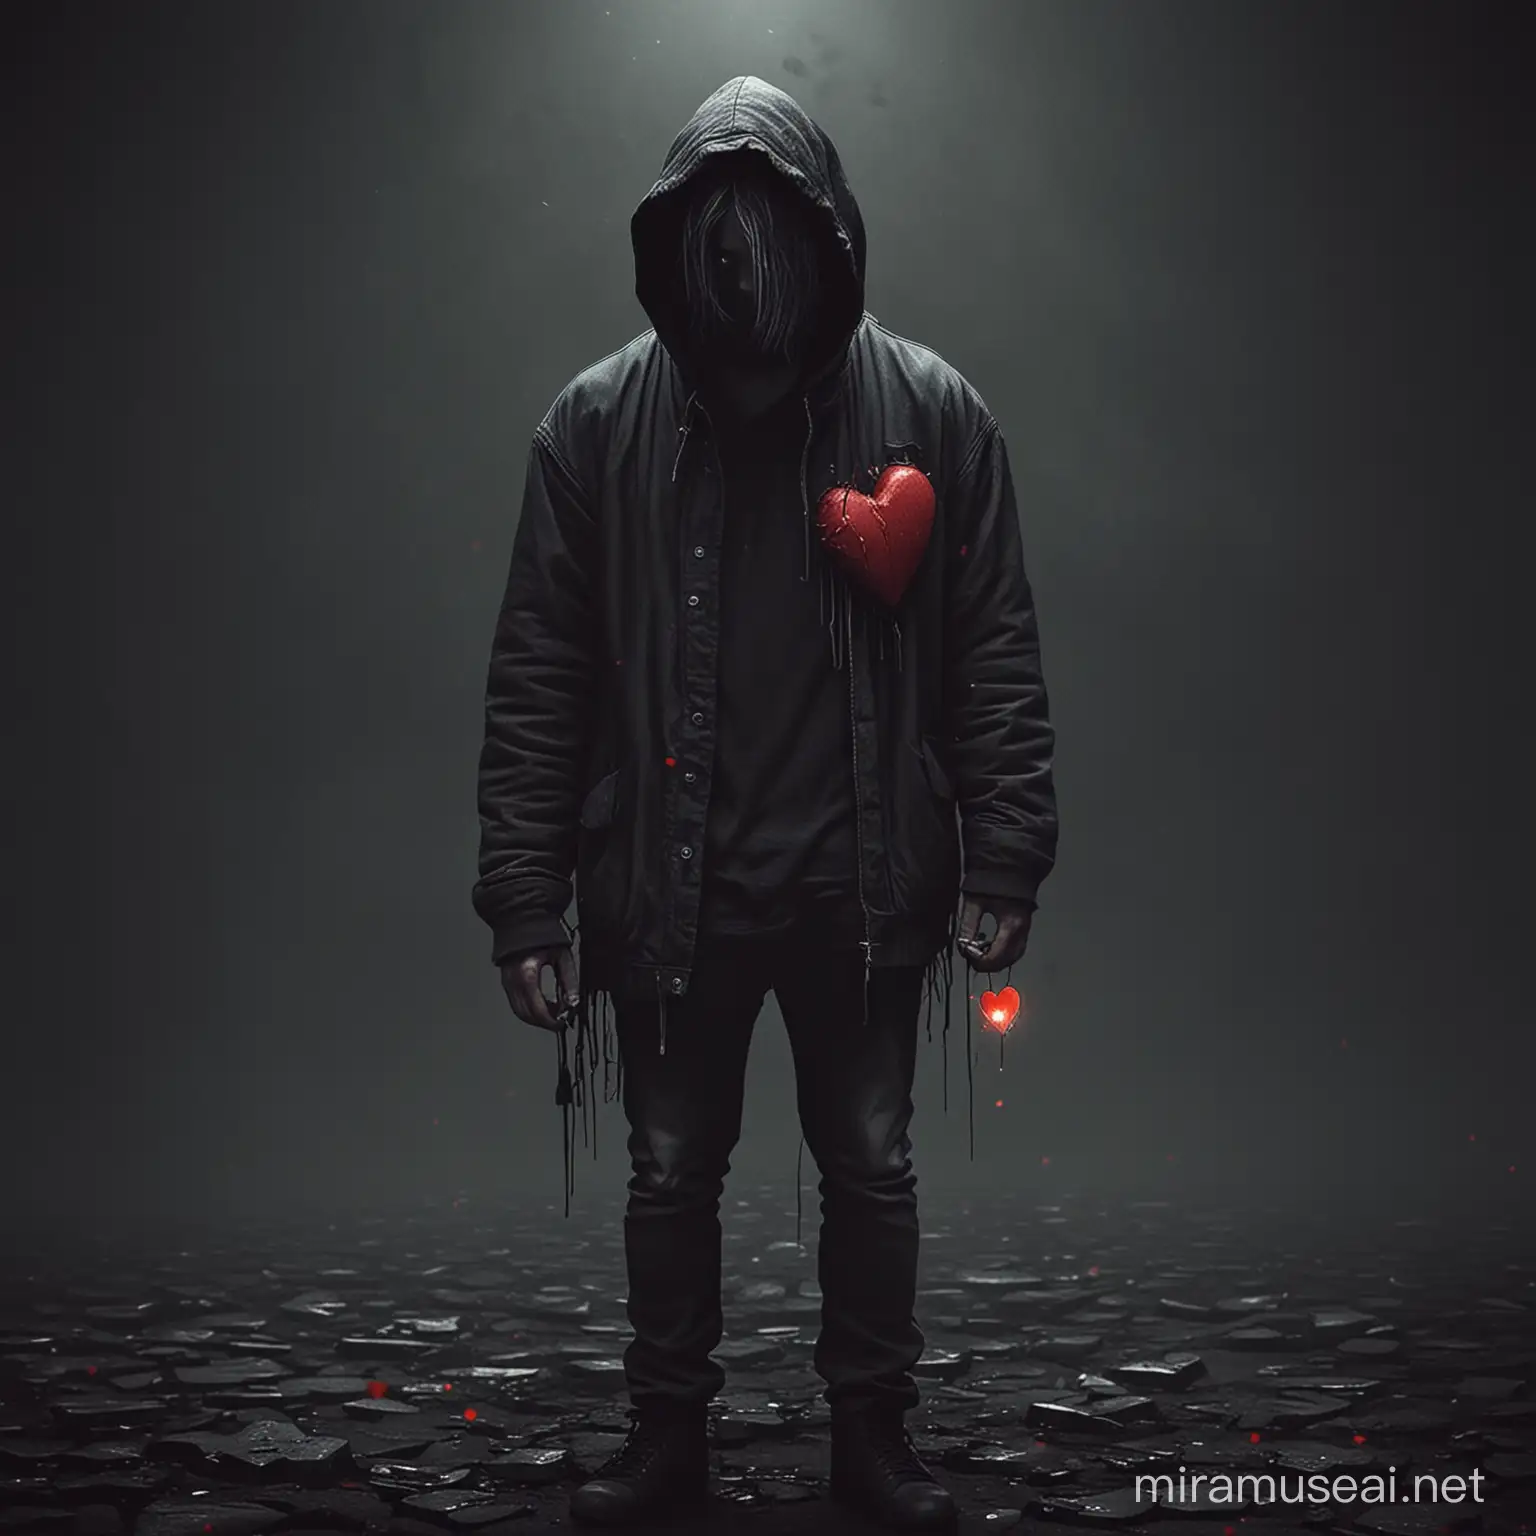 Lonely Man Holding a Broken Heart in Darkness